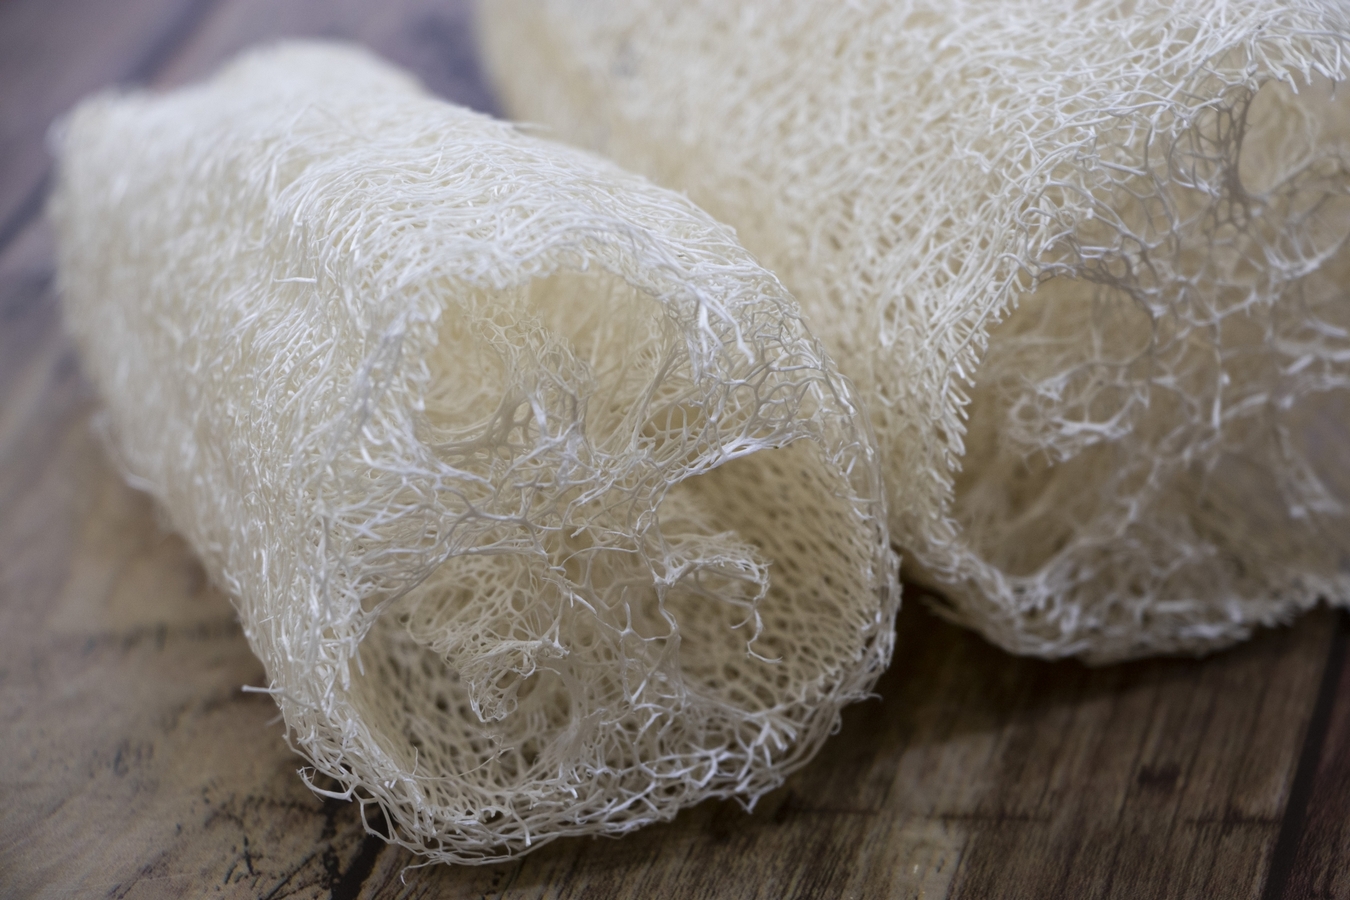 Now that the Luffa sponge is prepared and cleaned, it's ready for further processing. Depending on your desired end product, you can cut the Luffa into smaller sections, remove any remaining seeds, or shape it into different forms. The possibilities are endless!